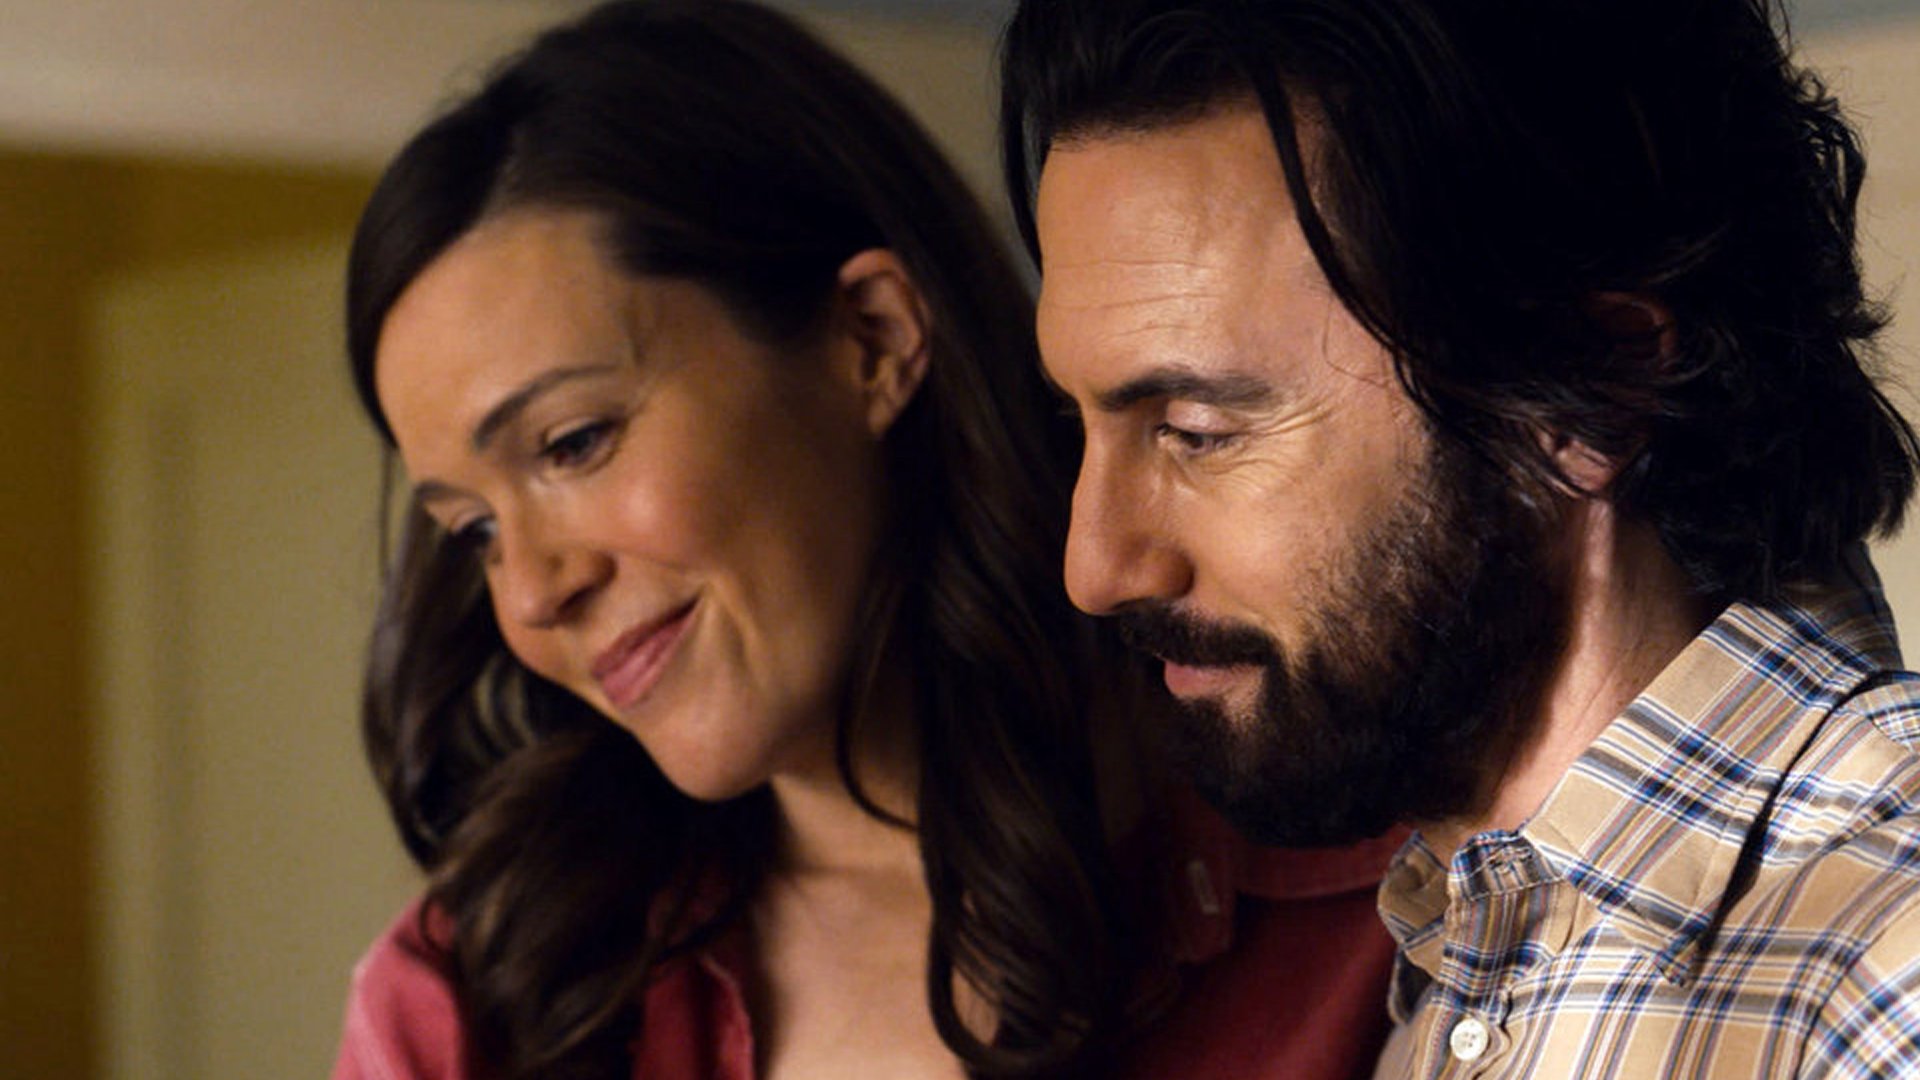 Screengrab of Mandy Moore as Rebecca Pearson and Milo Ventimiglia as Jack Pearson on ‘This Is Us’ Season 5 Episode 10, ‘I’ve Got This’